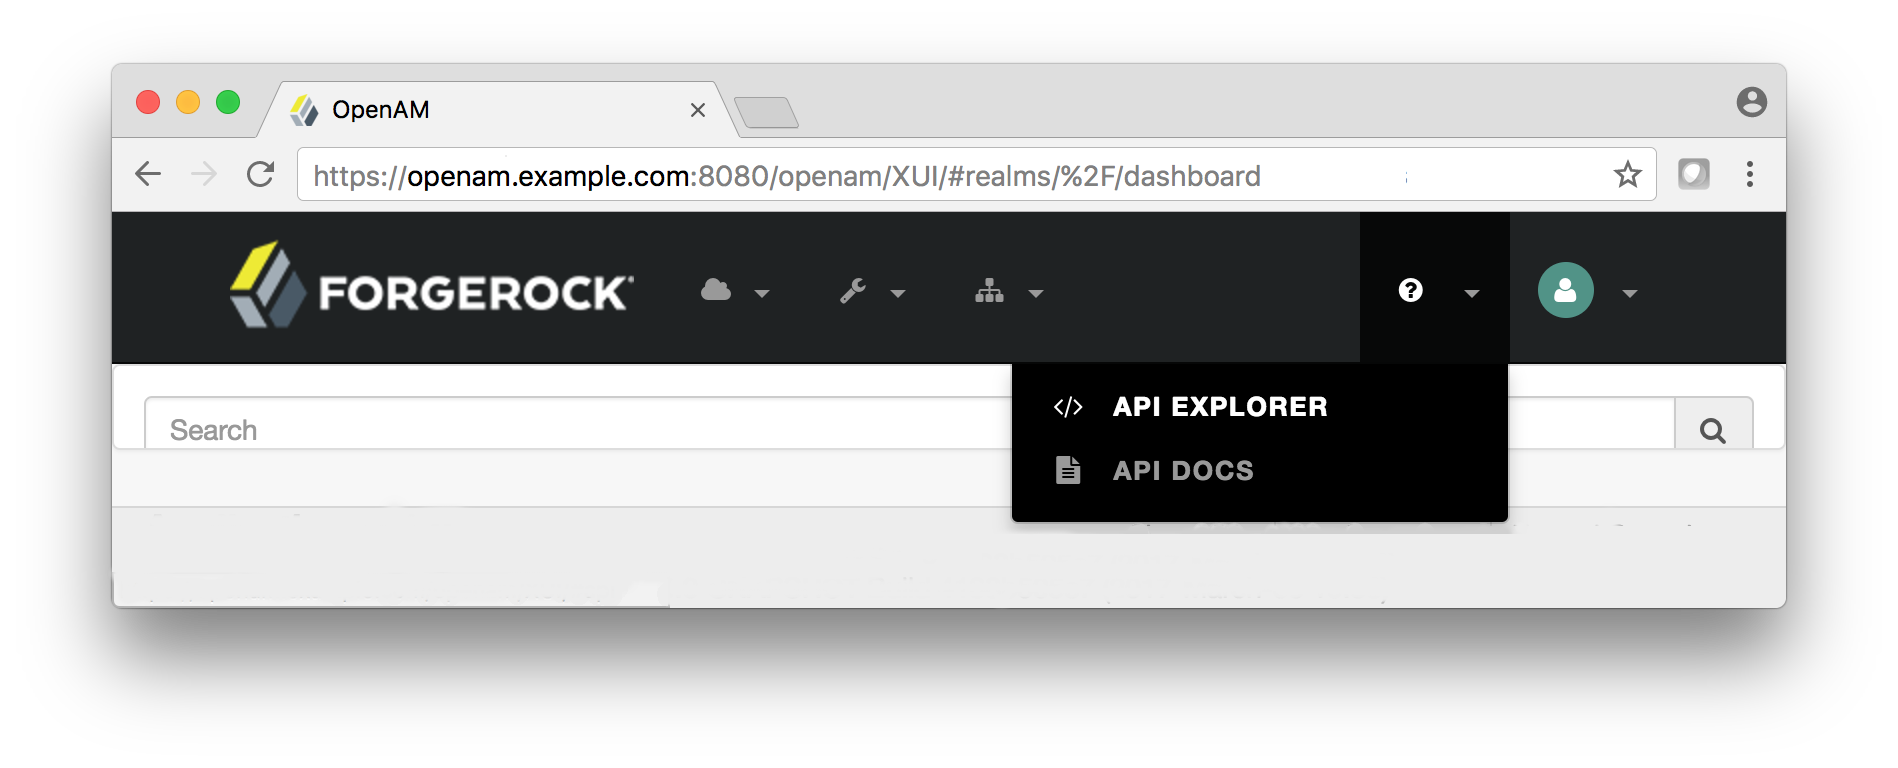 API Explorer page, which is accessible from the help icon on the AM admin UI